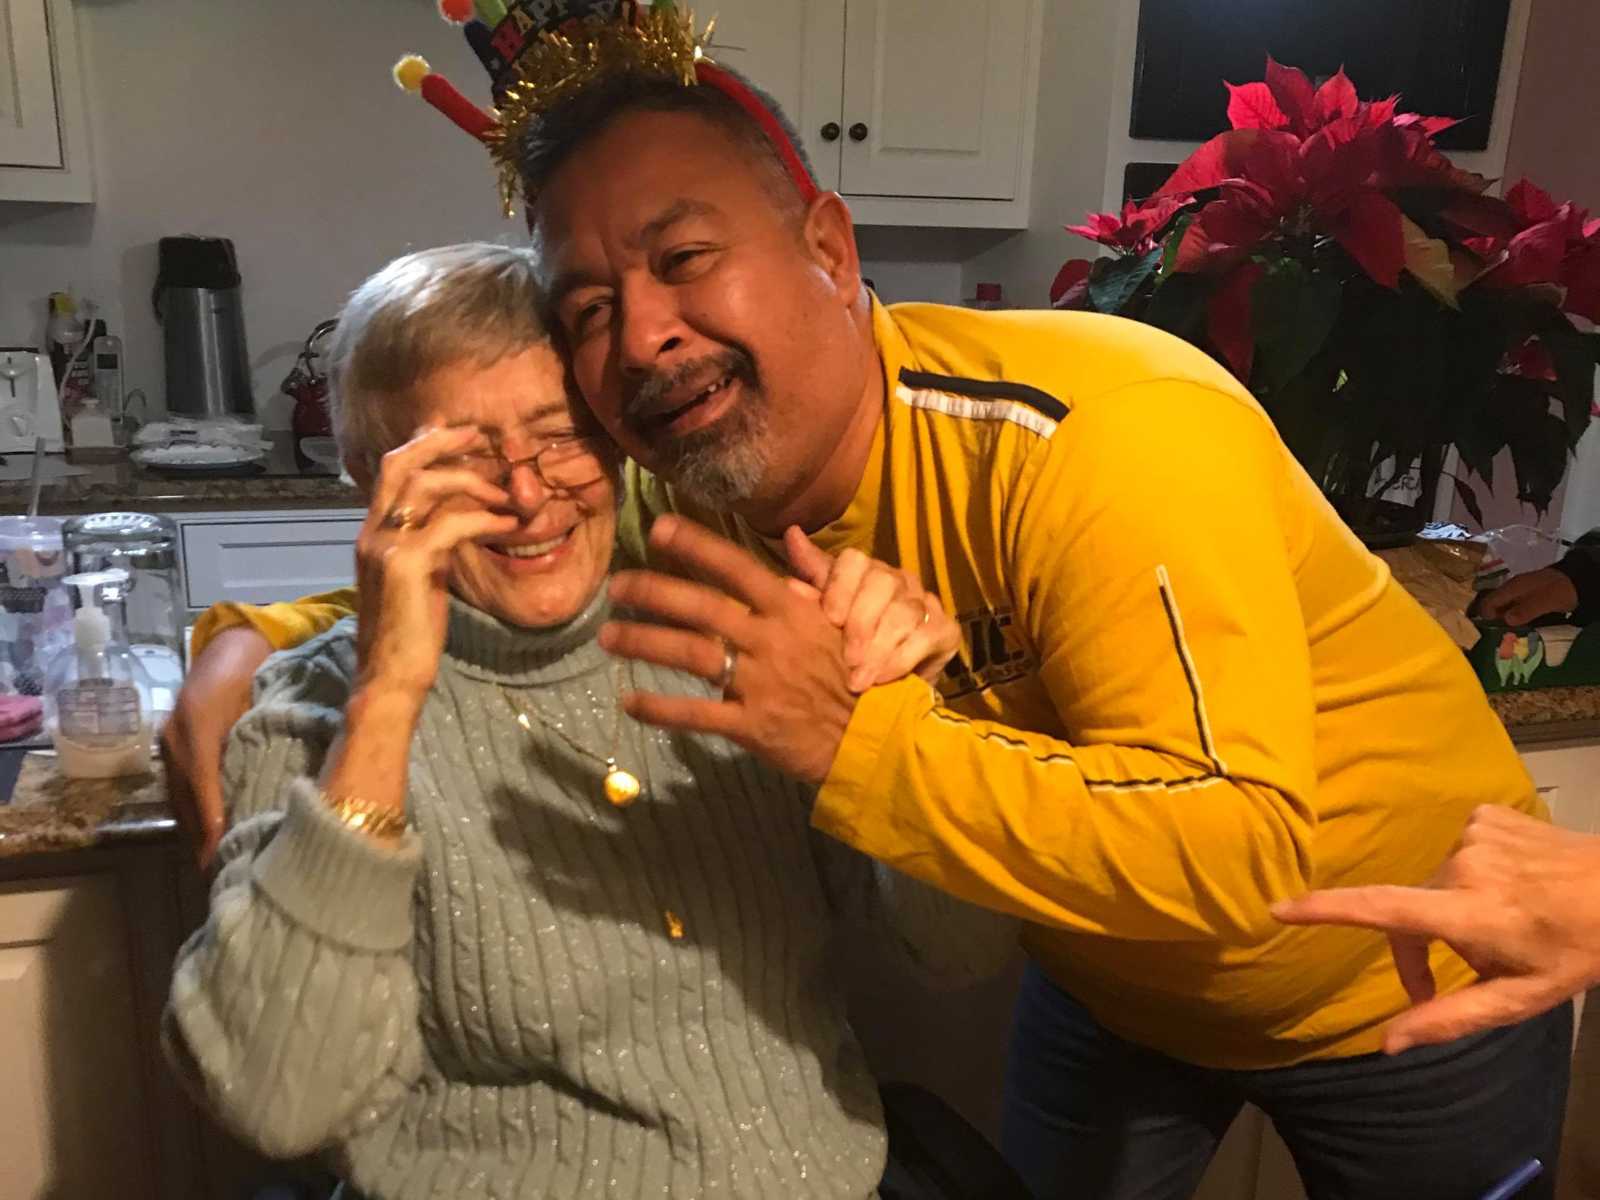 Man with birthday headband on leans over to give woman with dementia a hug